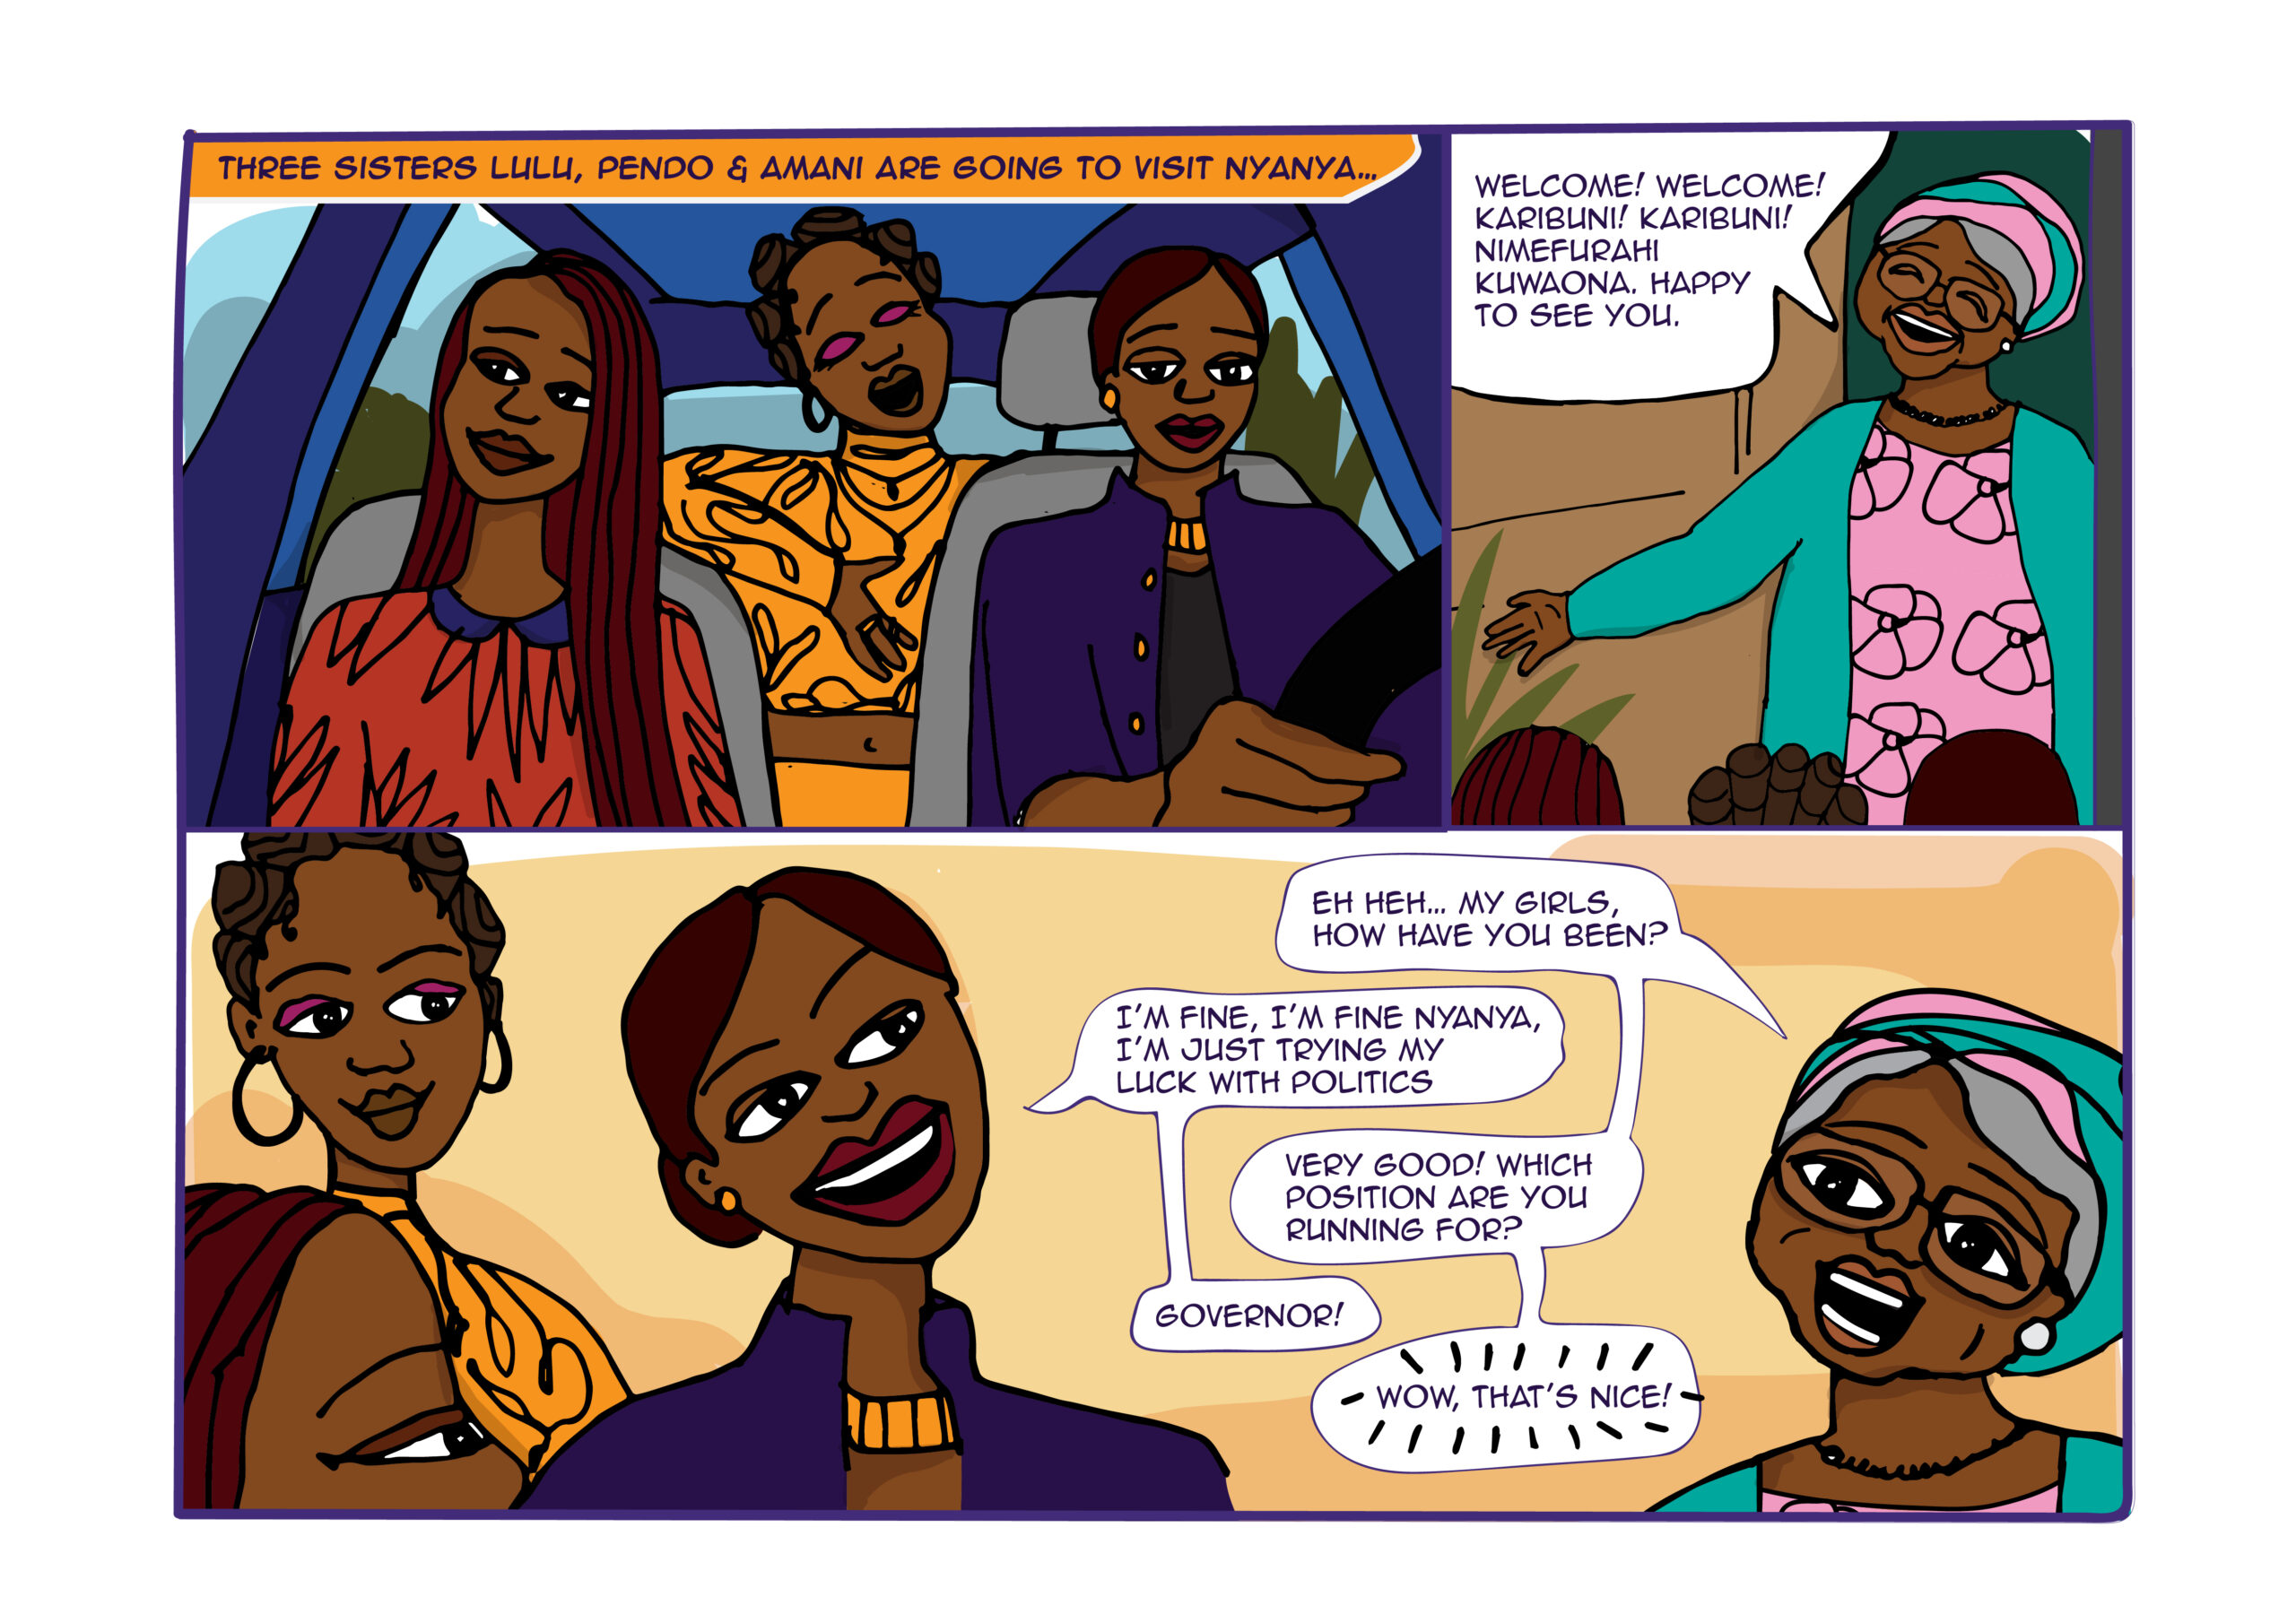 A KICTANet Comic Disabling Stereotypes on the Internet